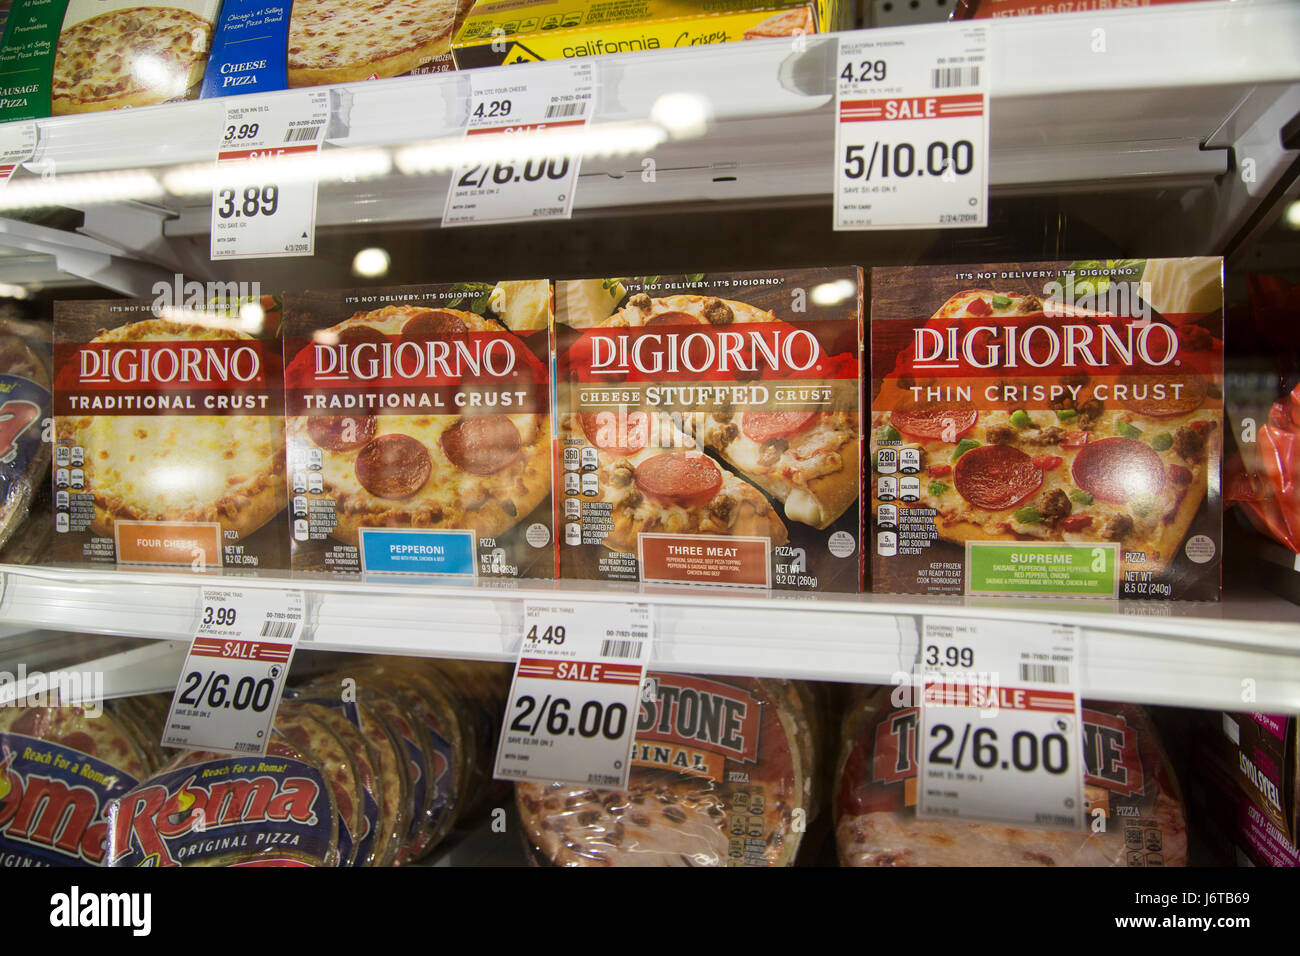 a display of DiGiorno frozen pizzas in a glass freezer case at a grocery store Stock Photo